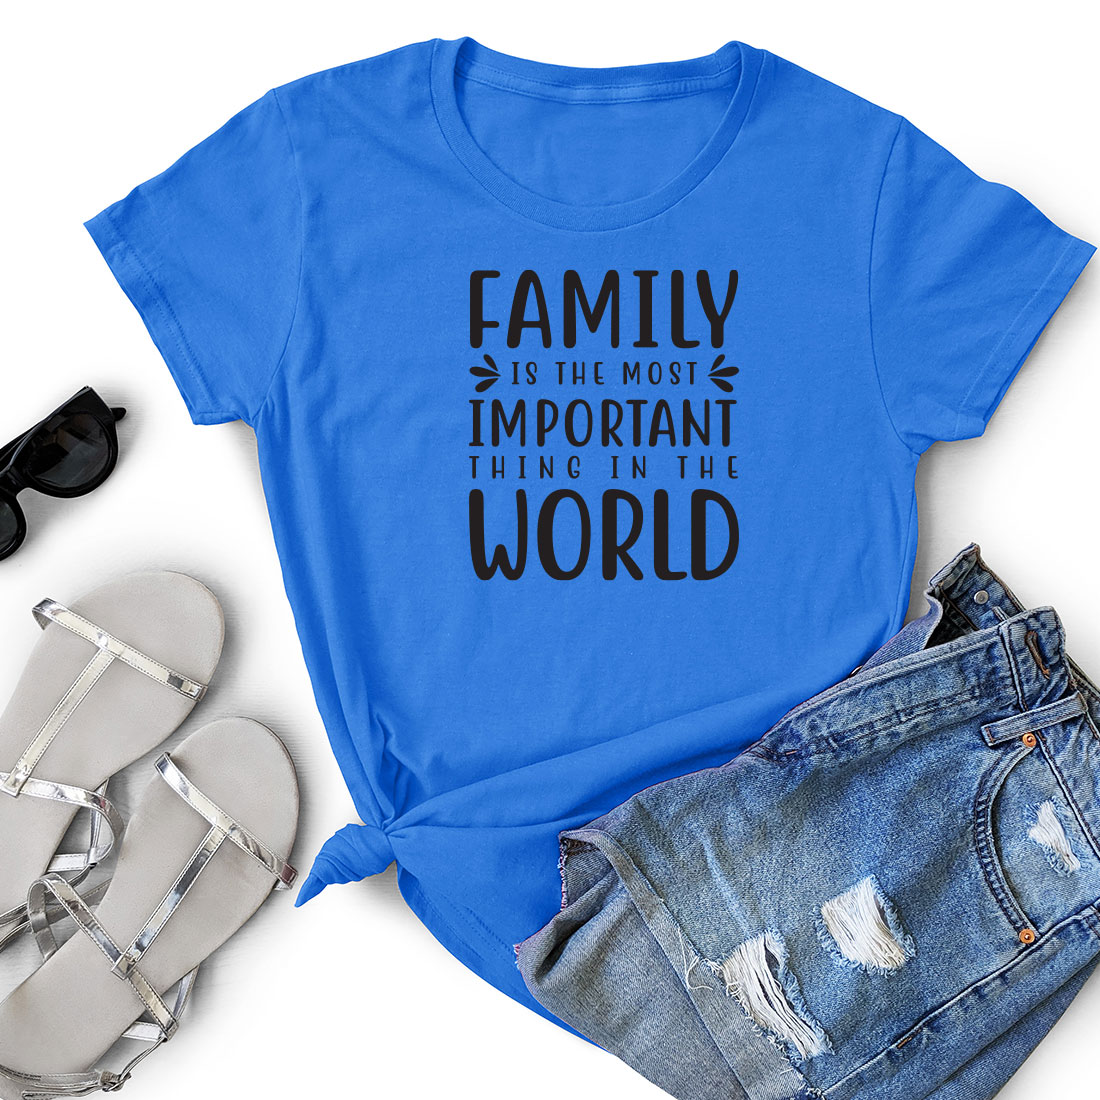 T - shirt that says family is the most important thing in the world.